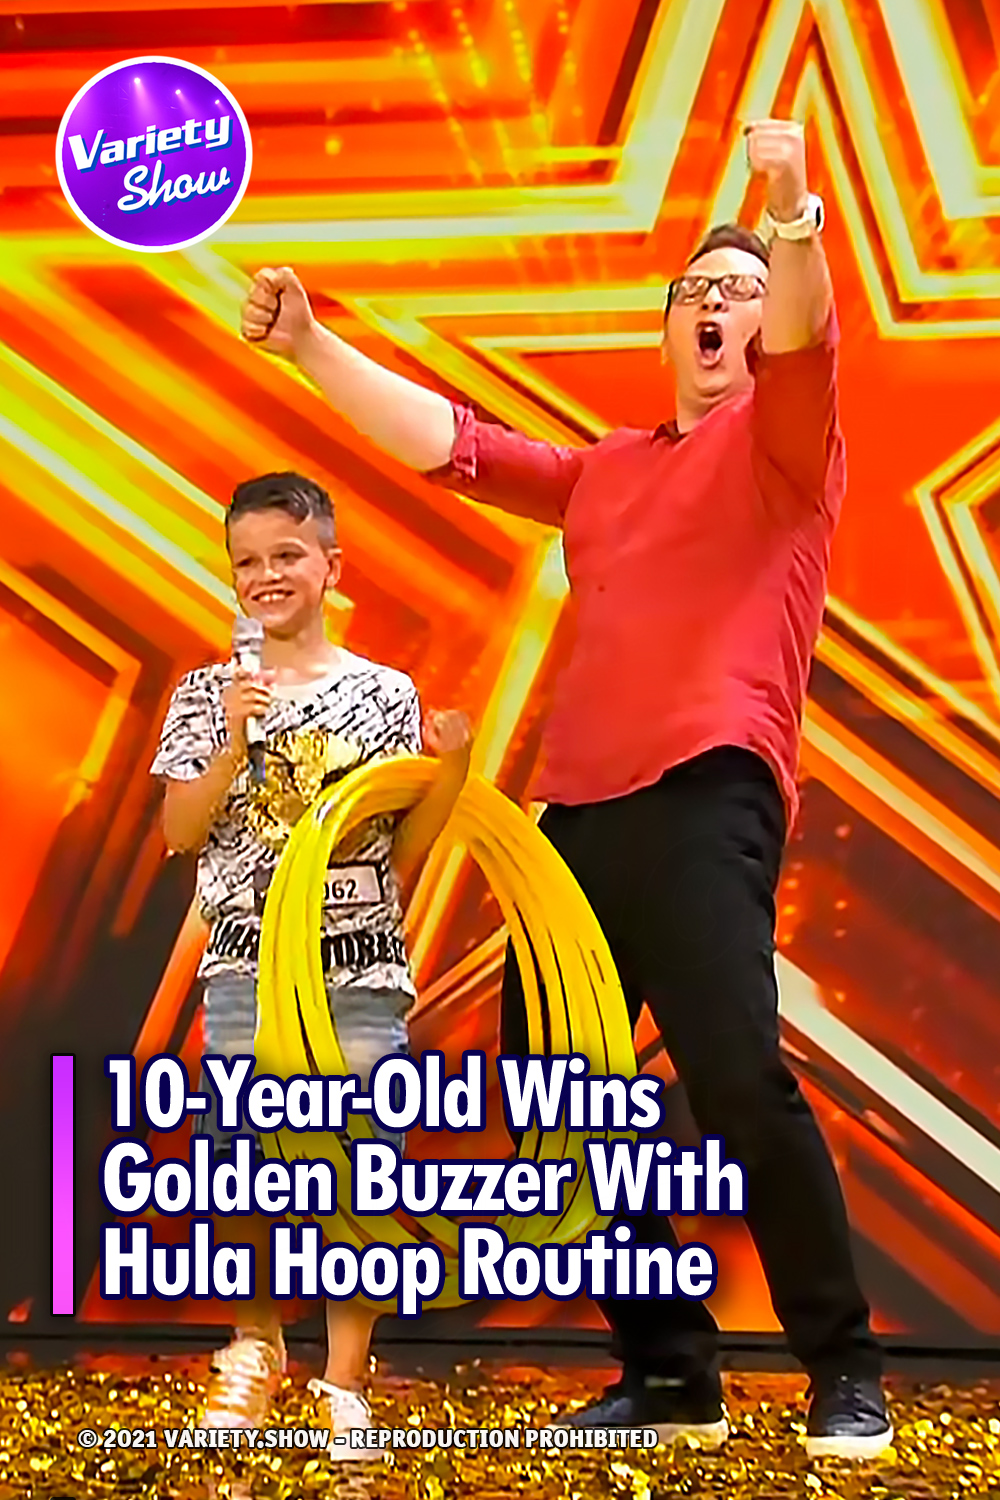 10-Year-Old Wins Golden Buzzer With Hula Hoop Routine